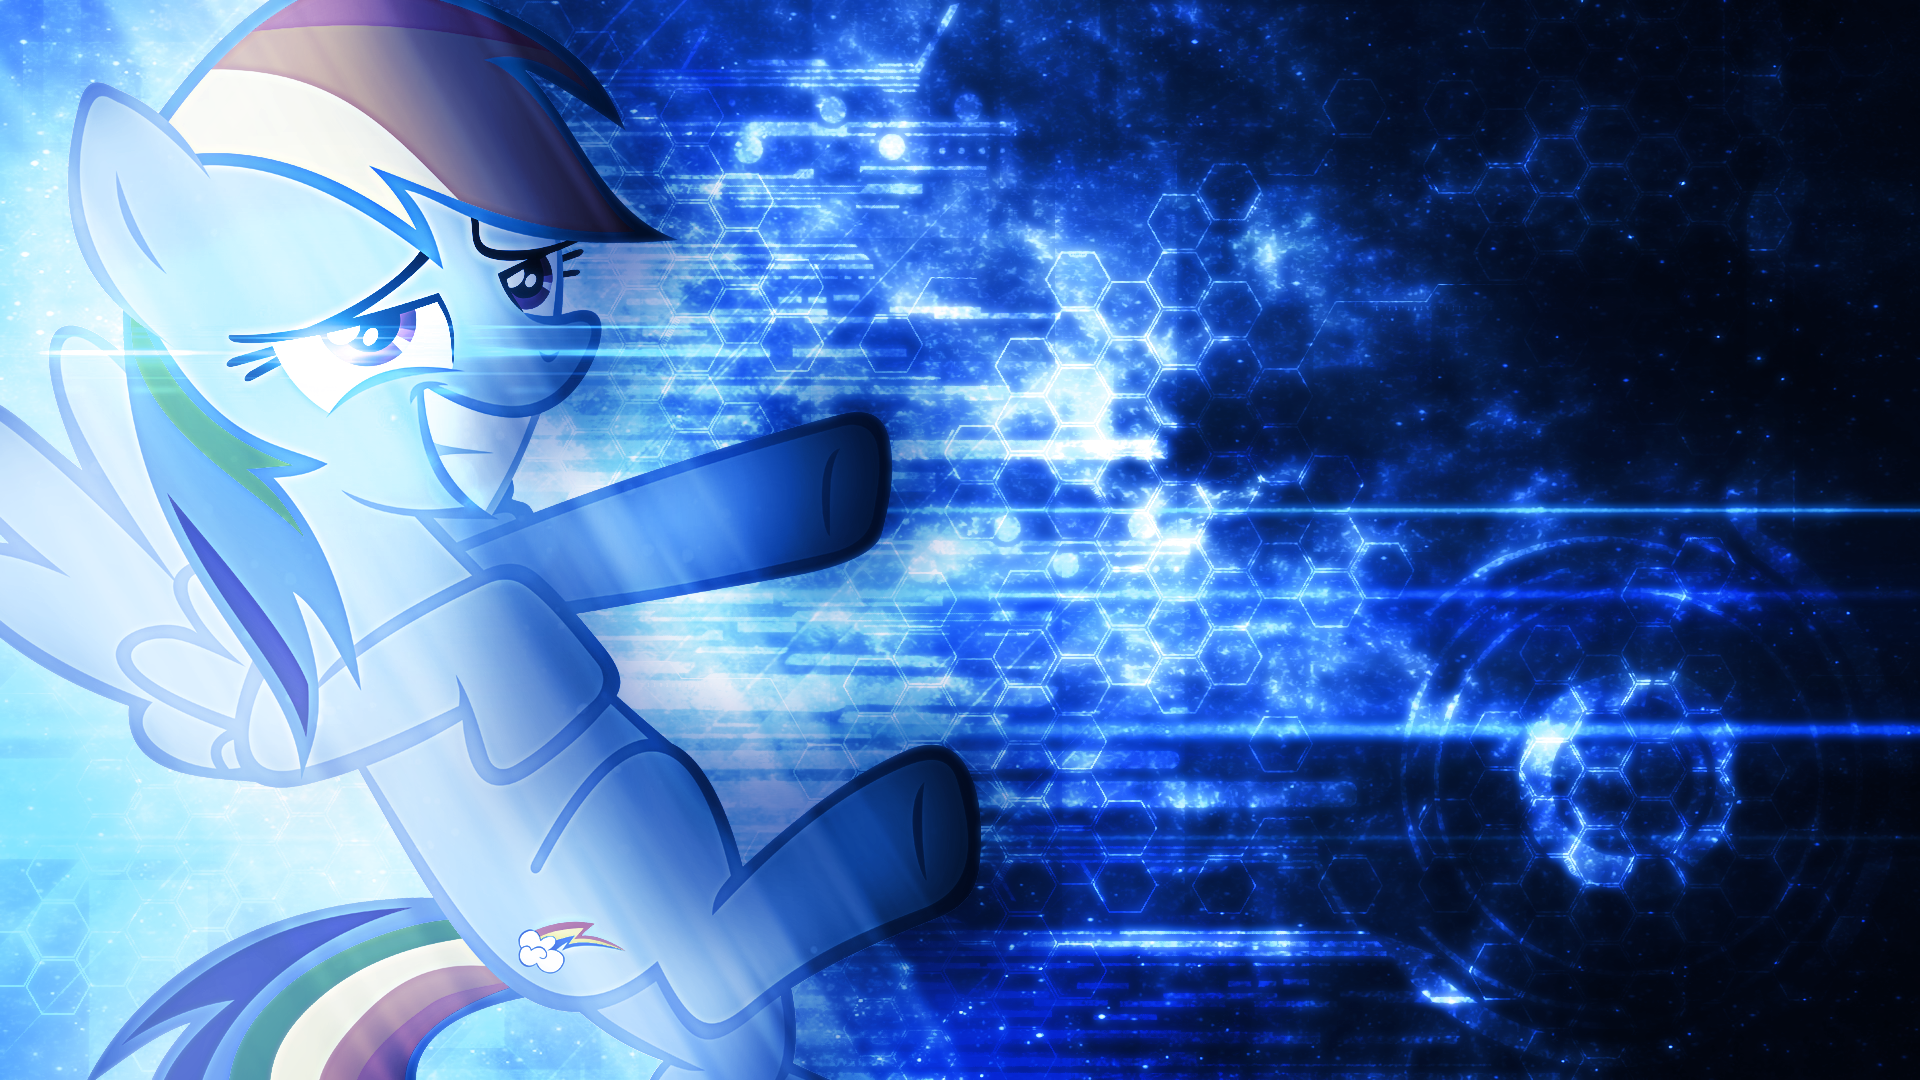 Rainbow Dash Wallpaper by Anxet and Tzolkine